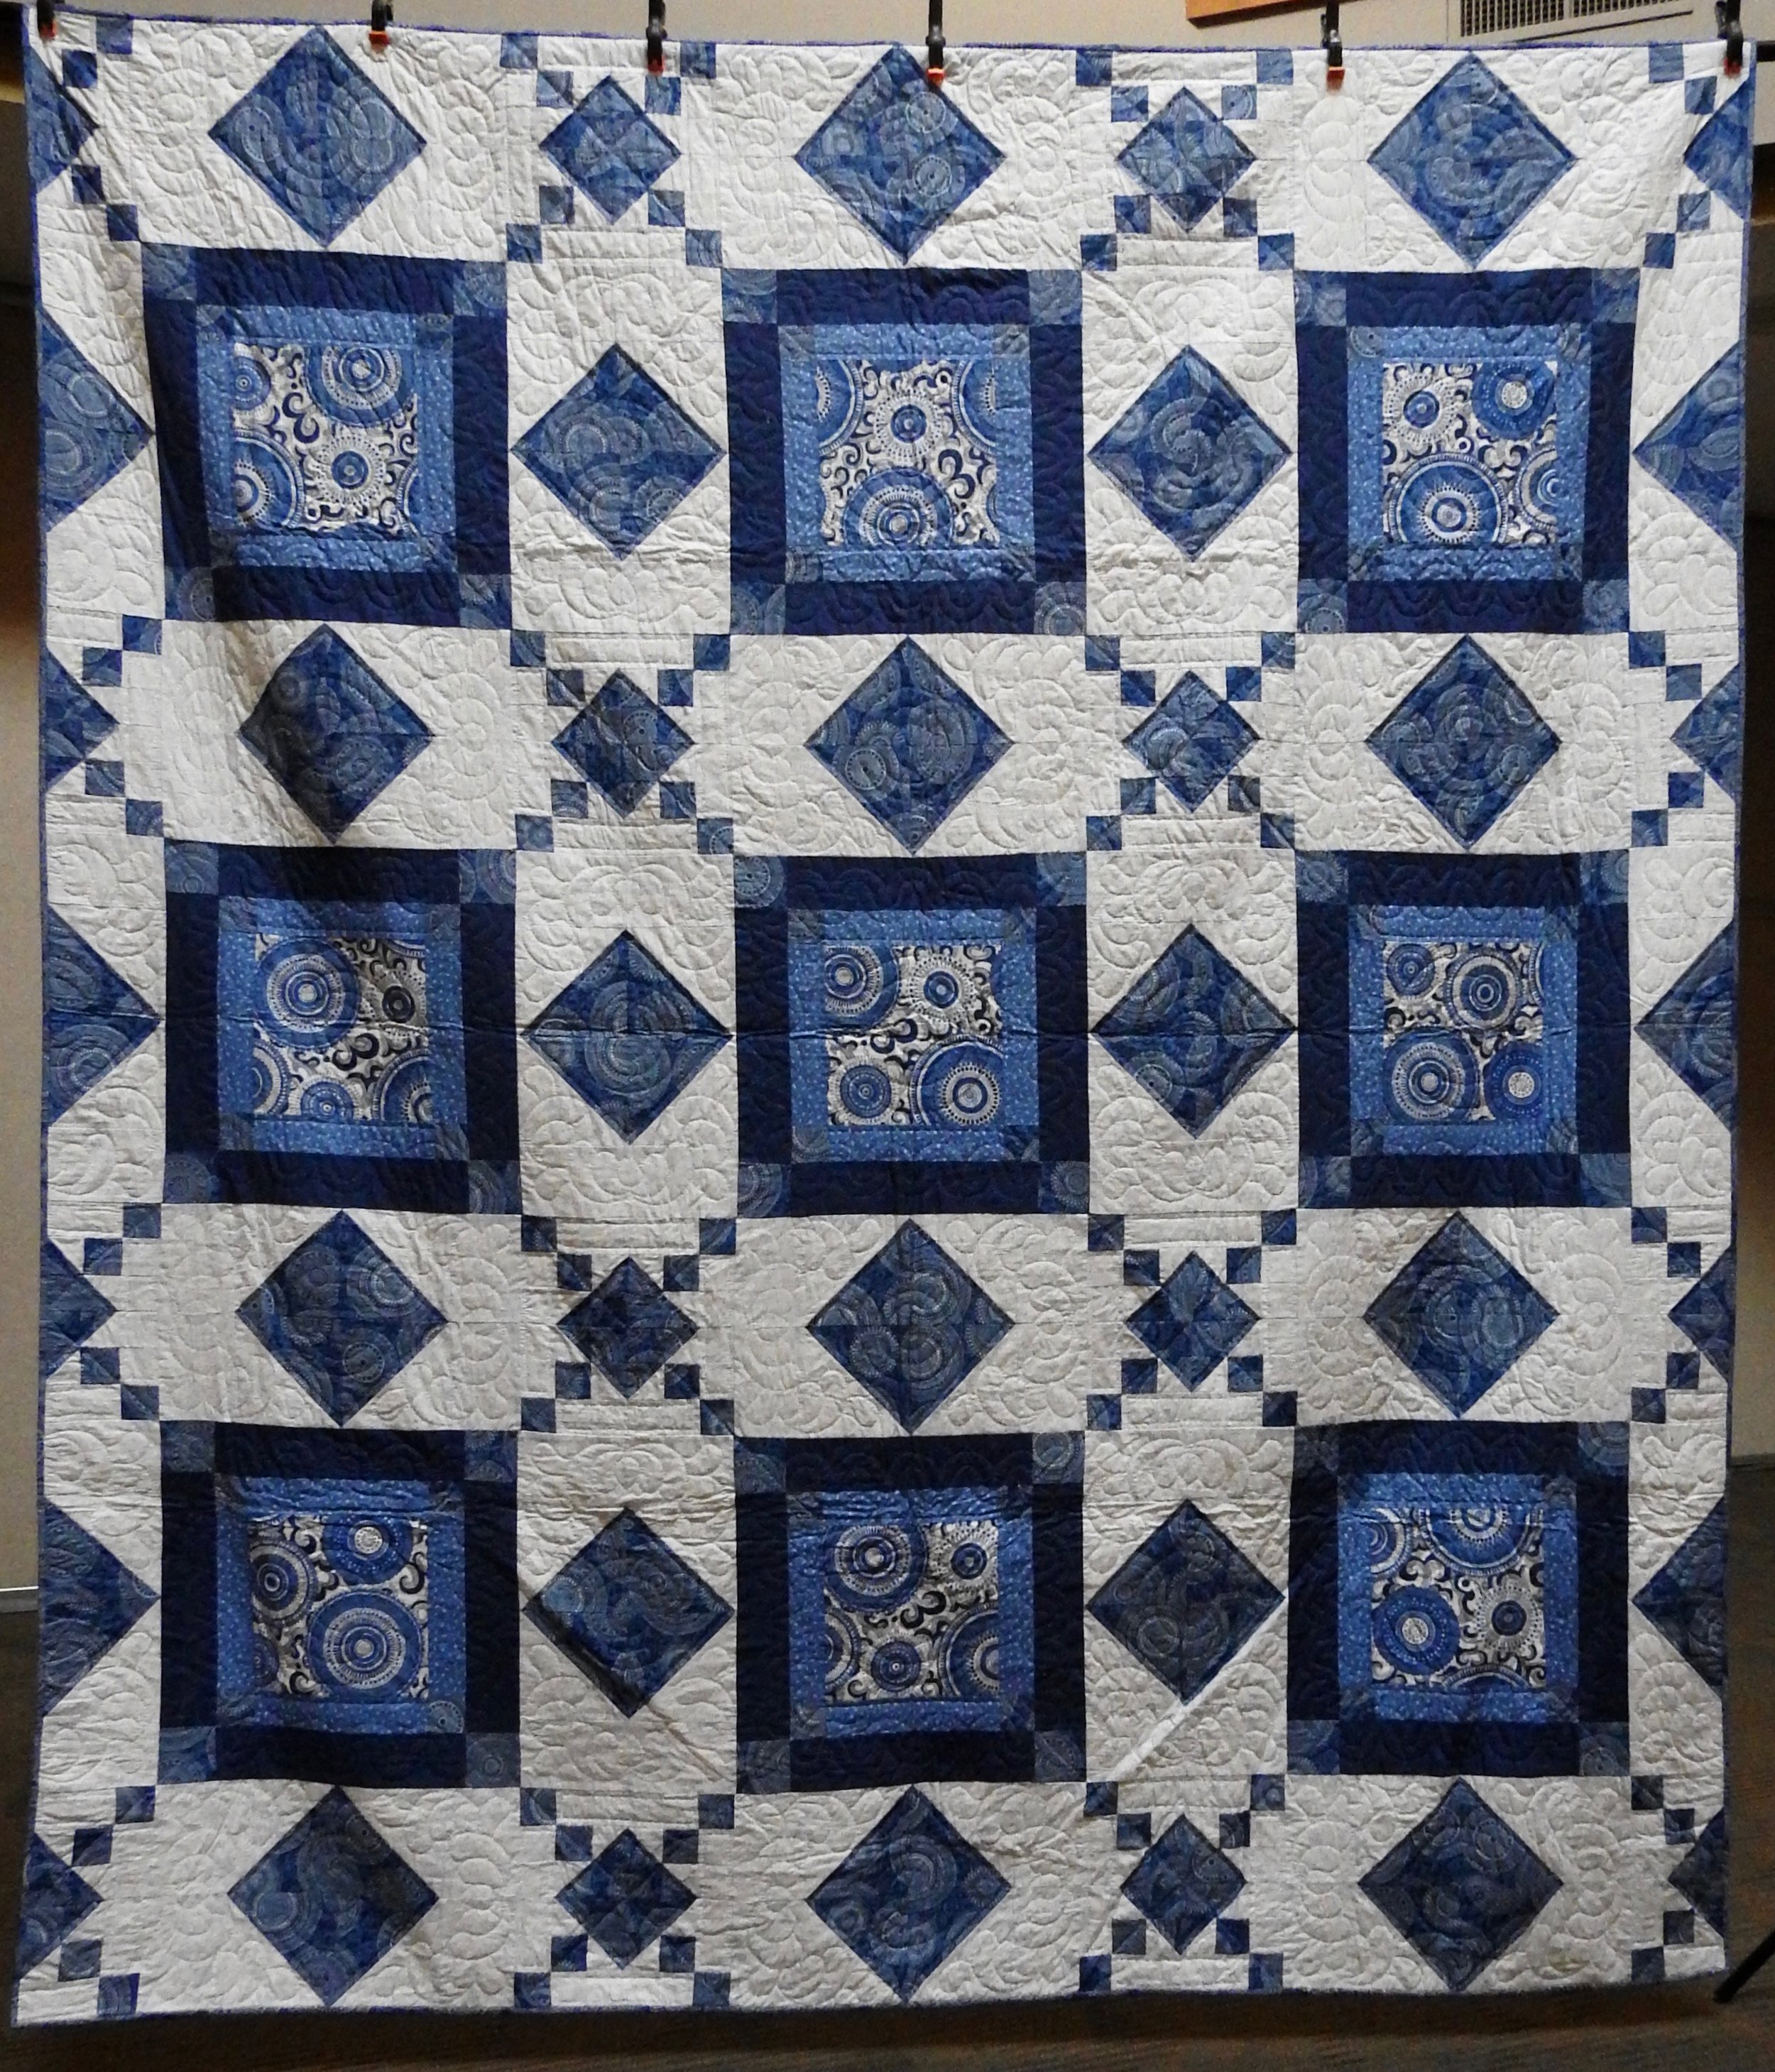 Blue Swirl, Pieced by Linda Stenberg, Single Needle hand Quilted by Marilouise Hagenberg, donated by the Linda Stenberg Estate, 94 x 107”